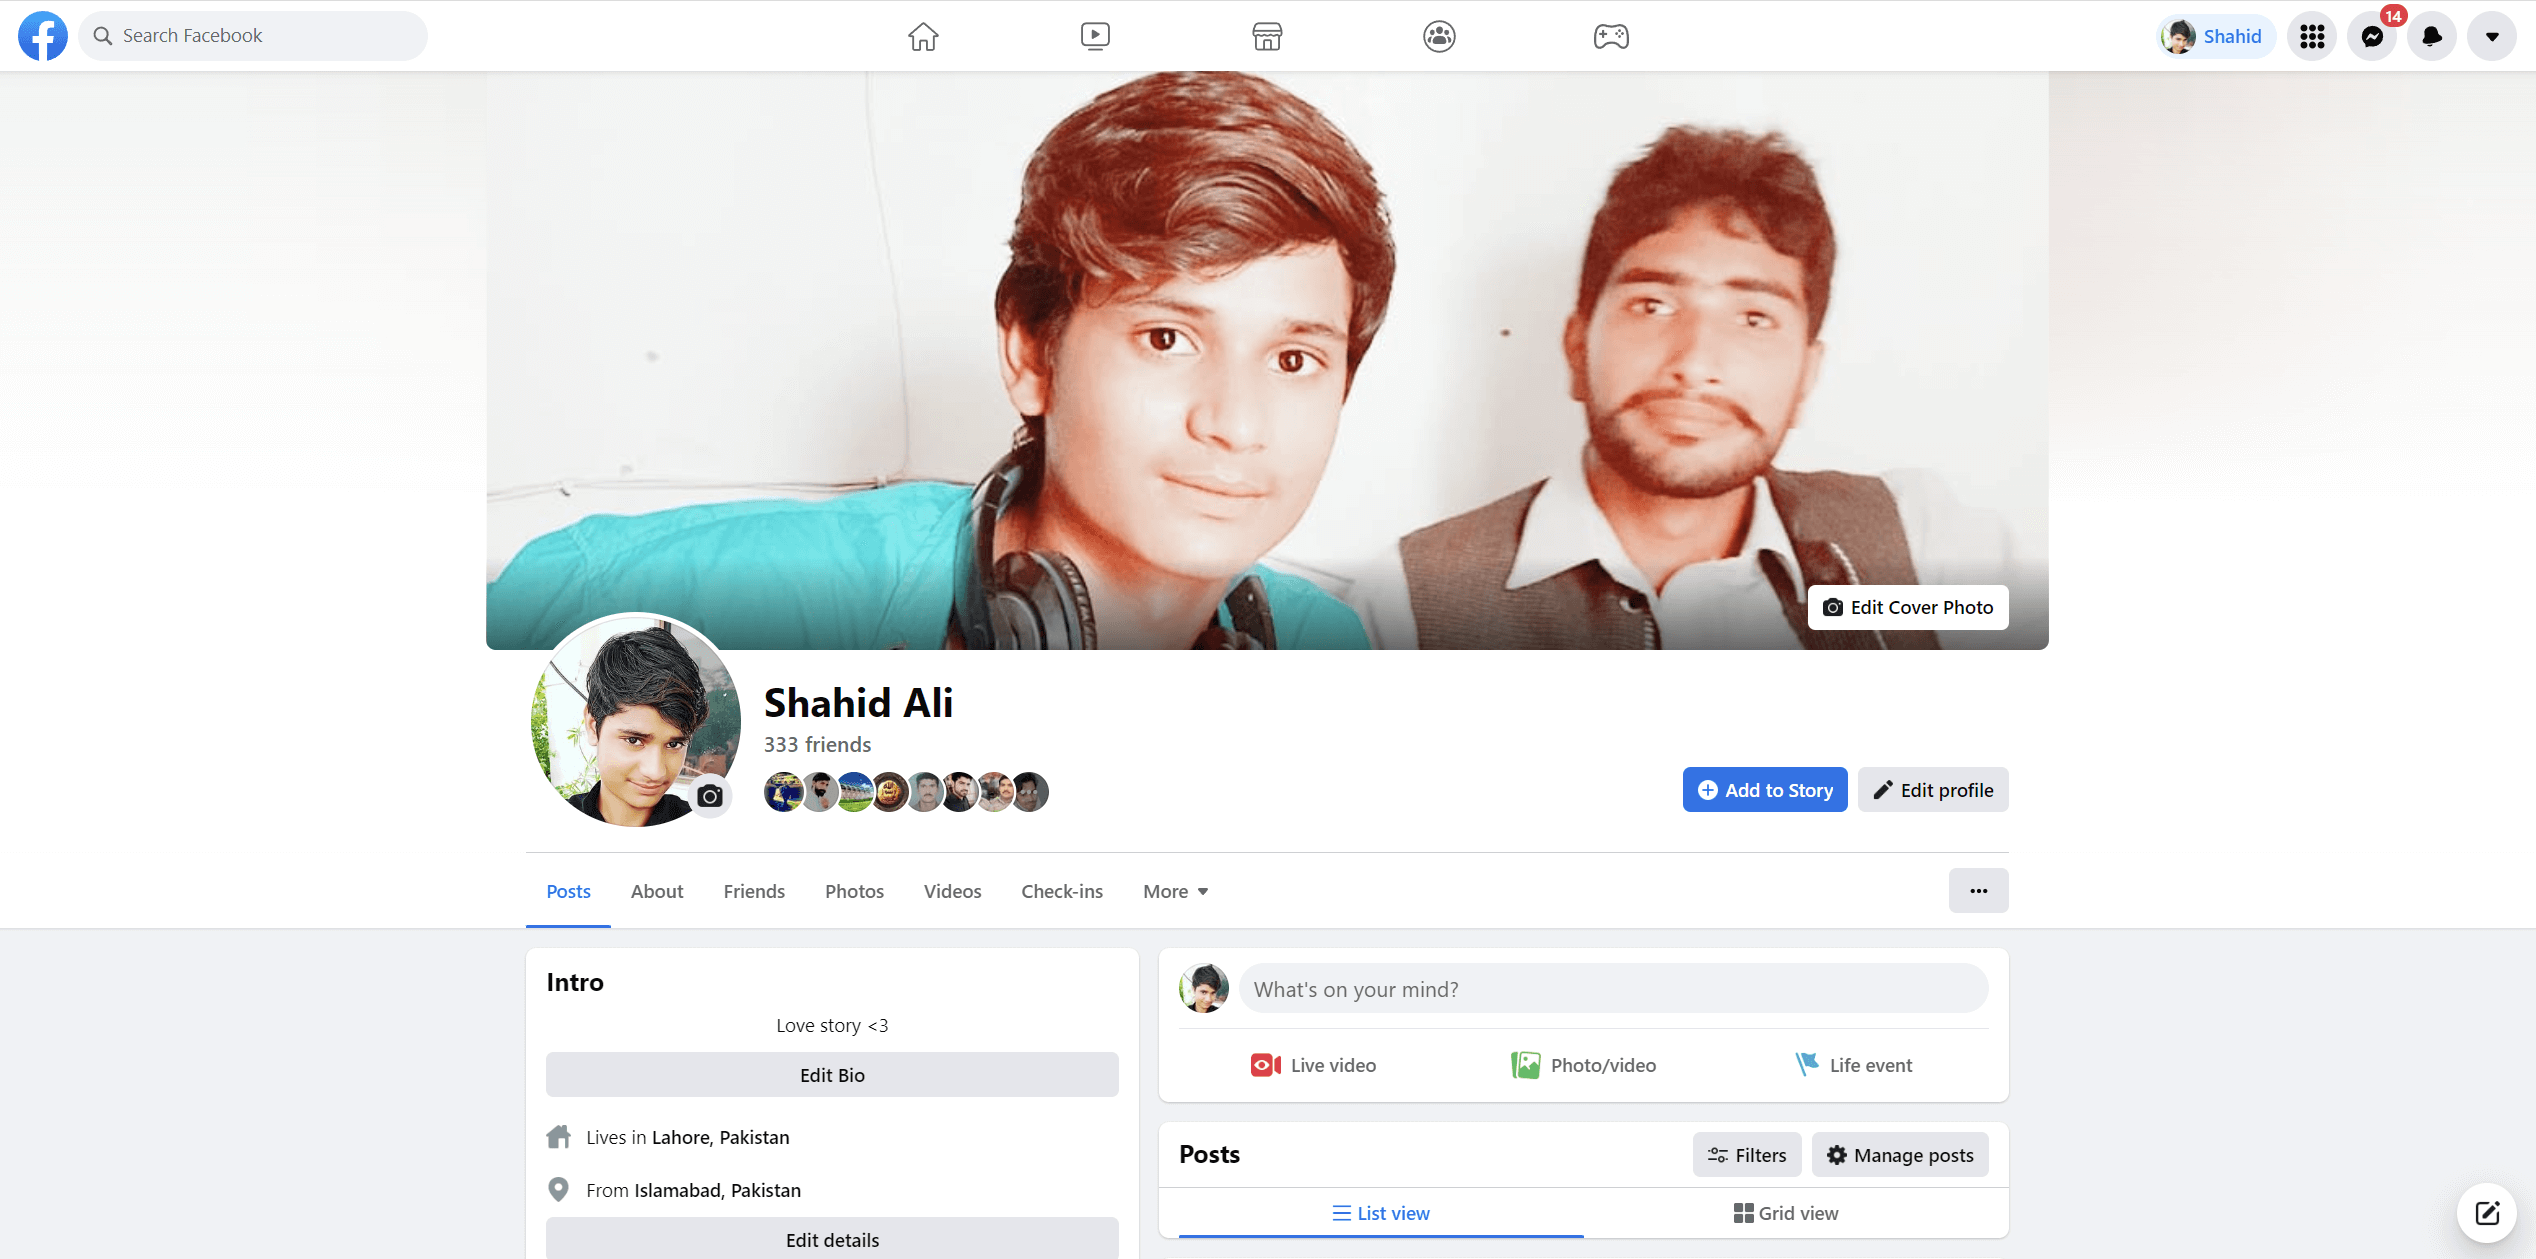 Pakistan identity verified FB account (registered between 2010 and 2021, daily spend limit $50, include ID card)